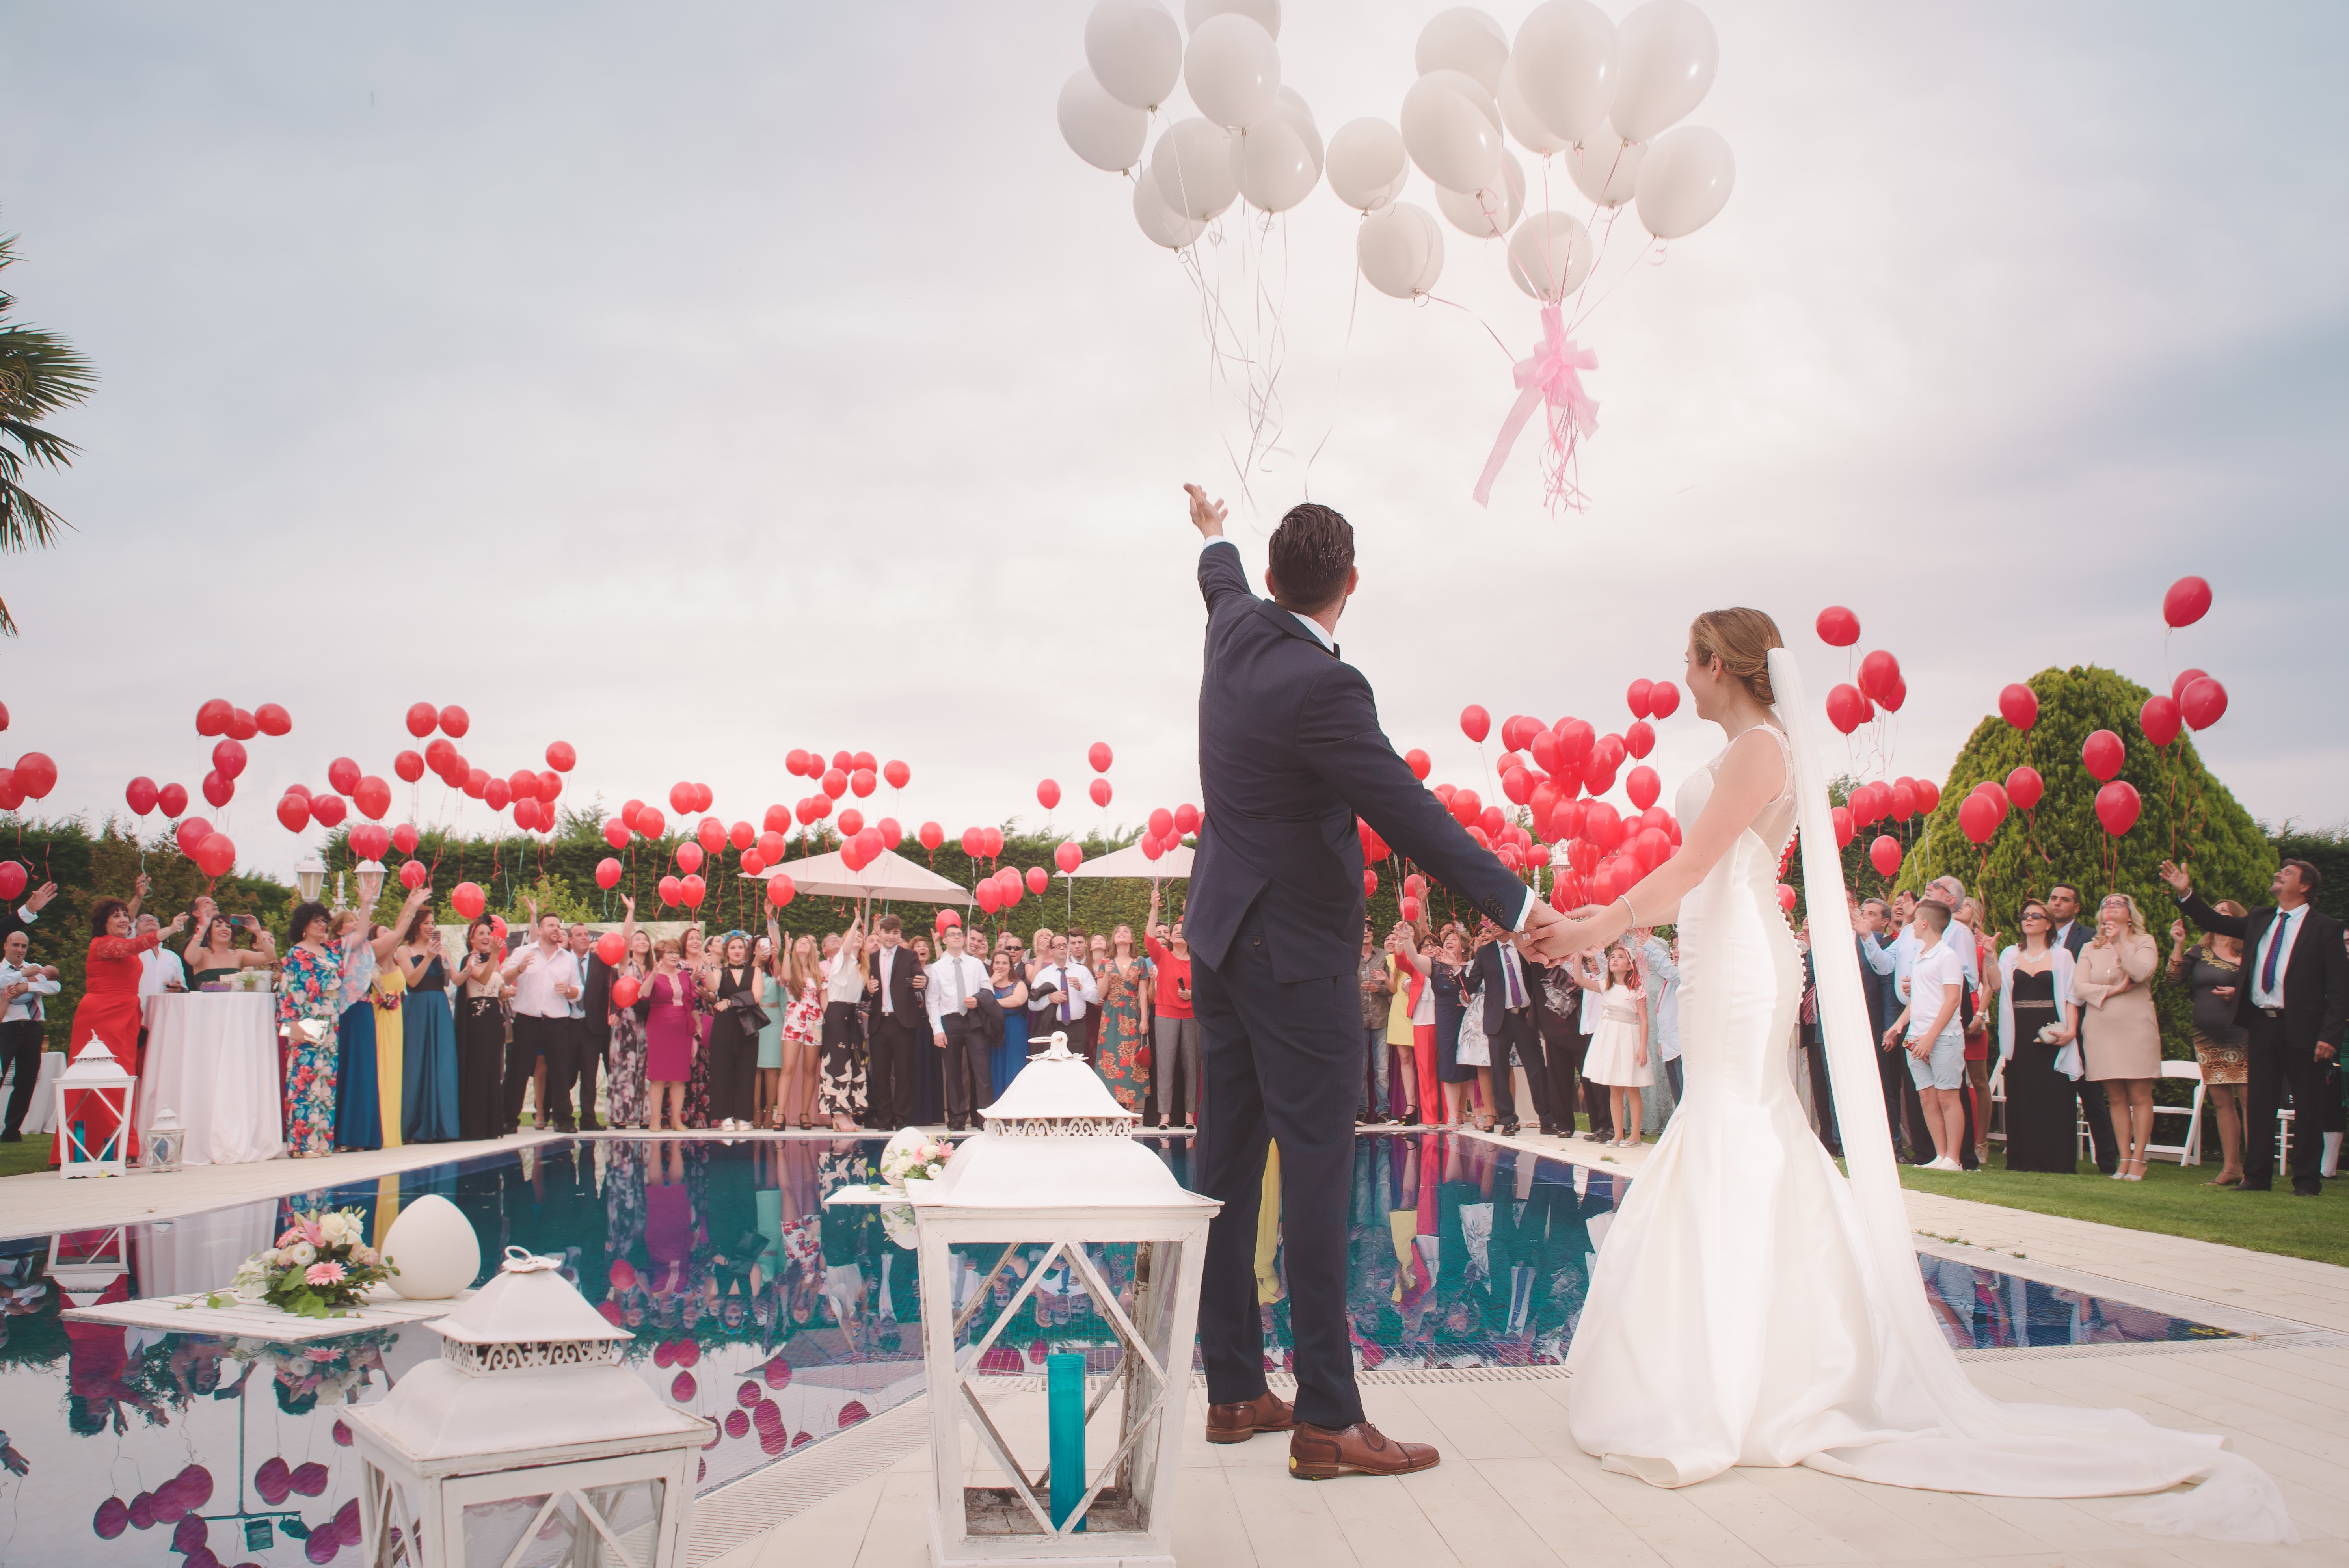 wedding guests with red balloons and the bride and groom